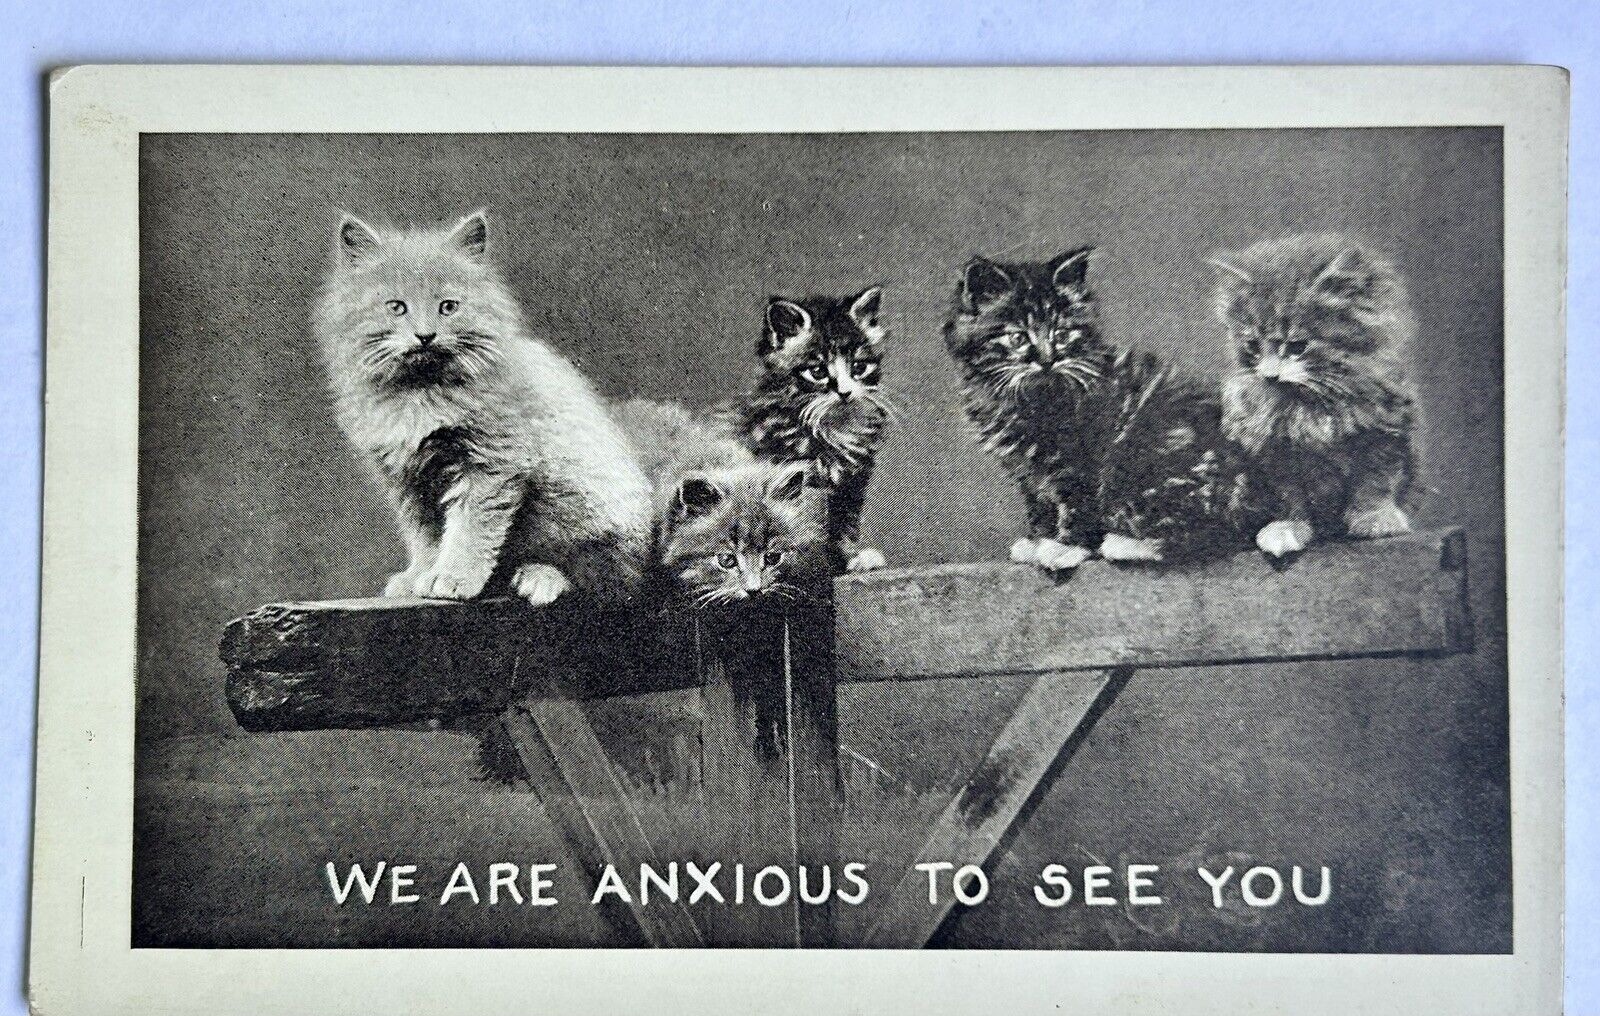 Anxious To See You Cats. Black And White Vintage Cat Postcard. Kittens.